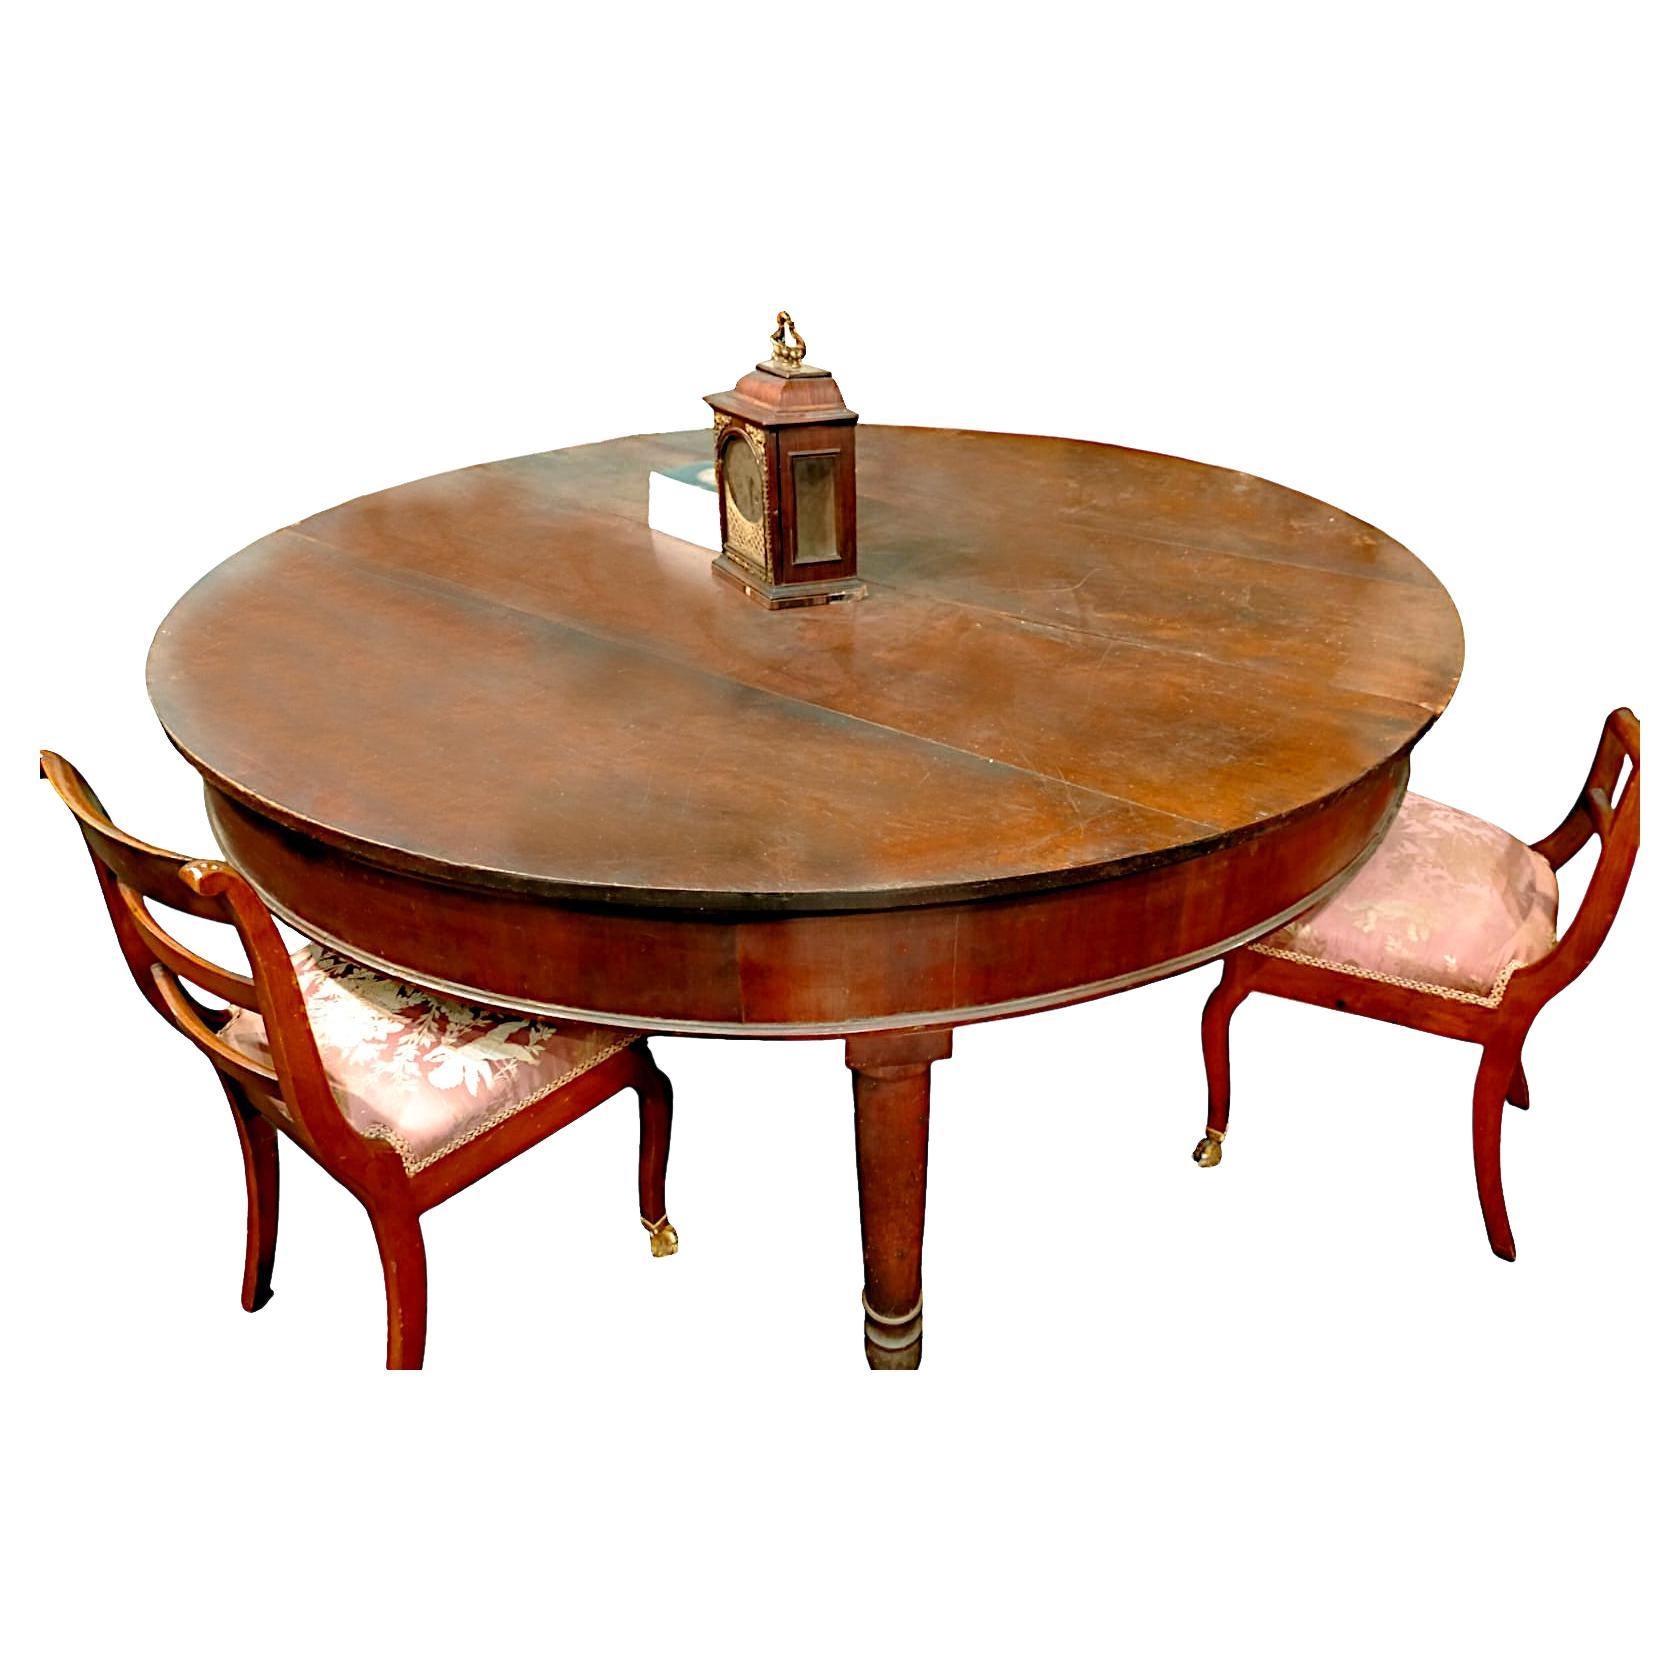 Large Round Extendable Walnut Table Charles X Period, Early 19th Century'